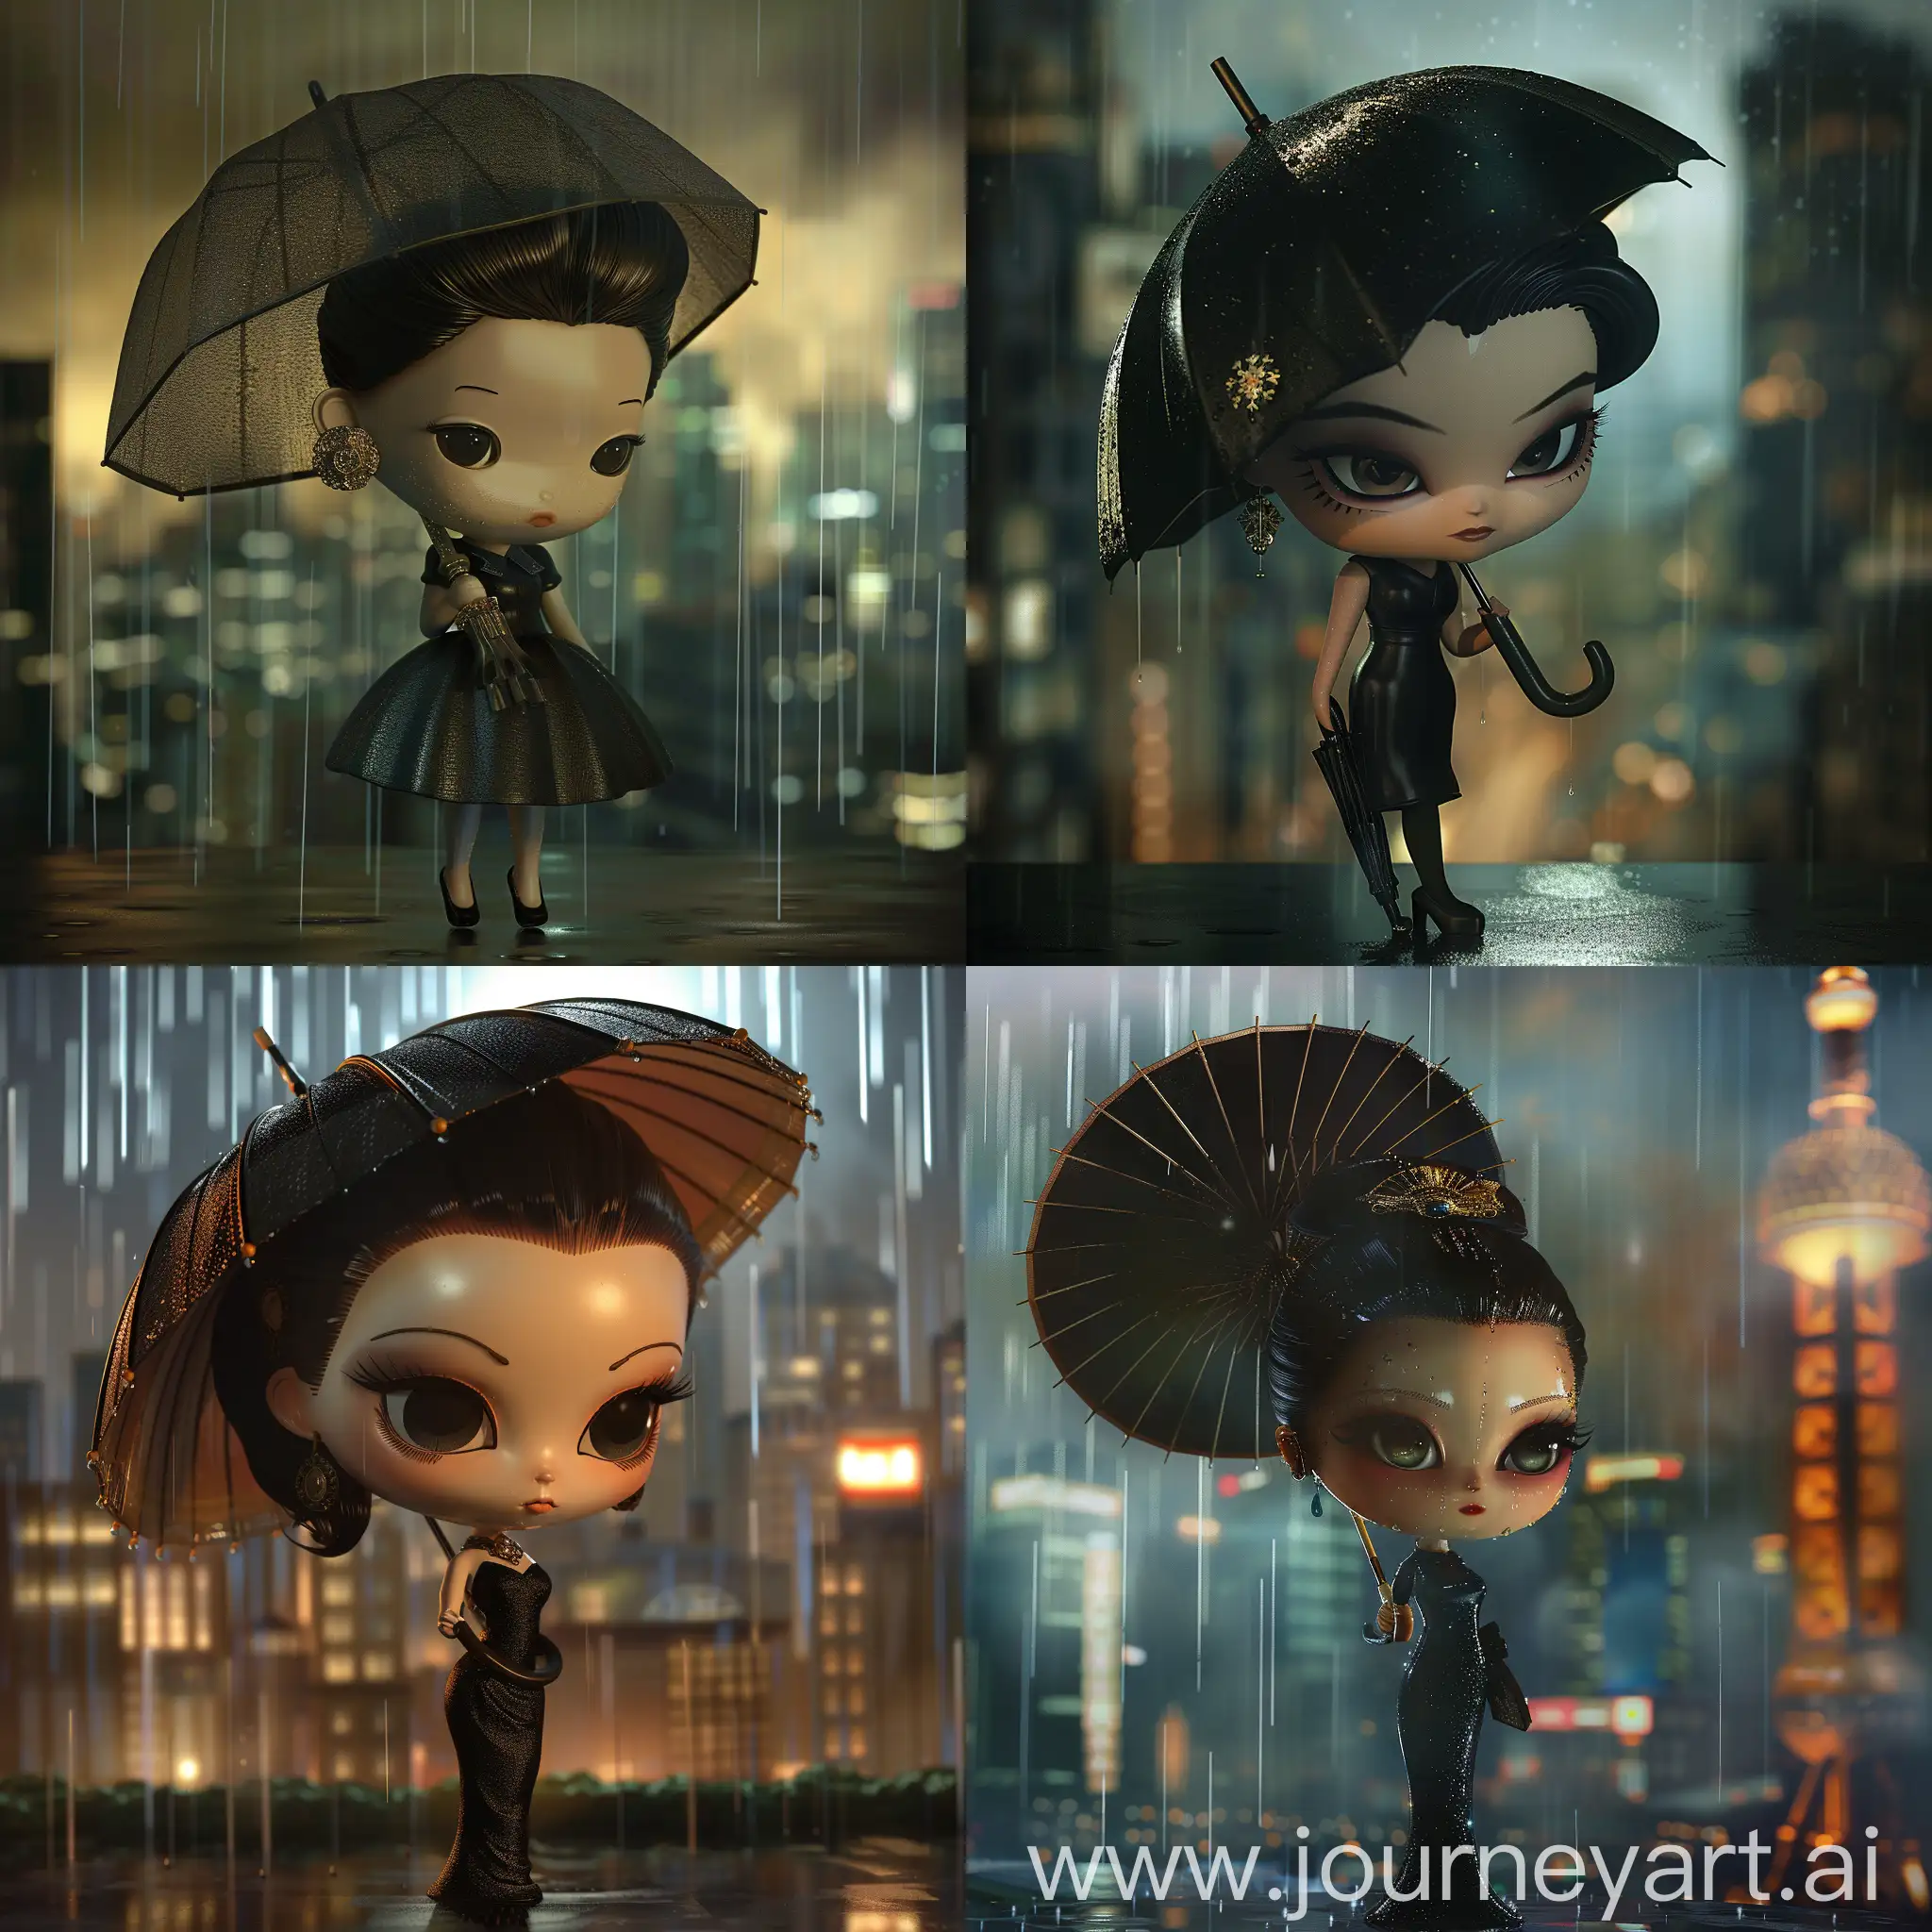 A captivating 3D render of a chibi-style woman, exuding confidence and elegance as she braves a rainstorm. She is dressed in a sleek black dress and holds a large umbrella as a shield, standing tall amidst the downpour. Her sophisticated hairdo is adorned with a vintage brooch, adding to her enigmatic aura. The dimly lit cityscape behind her showcases Art Deco architecture and a blurred skyline, evoking a sense of motion and intrigue. The atmosphere blends vintage glamour, film noir, and a subtle influence of Japanese ukiyo-e artistry, creating a cinematic, conceptual portrait that transcends time and style. This painting, product, and 3D render embody the essence of anime, fashion, portrait photography, and conceptual art, resulting in a mesmerizing, tim, anime, 3d render, fashion, conceptual art, cinematic, architecture, portrait photography, ukiyo-e, painting, product